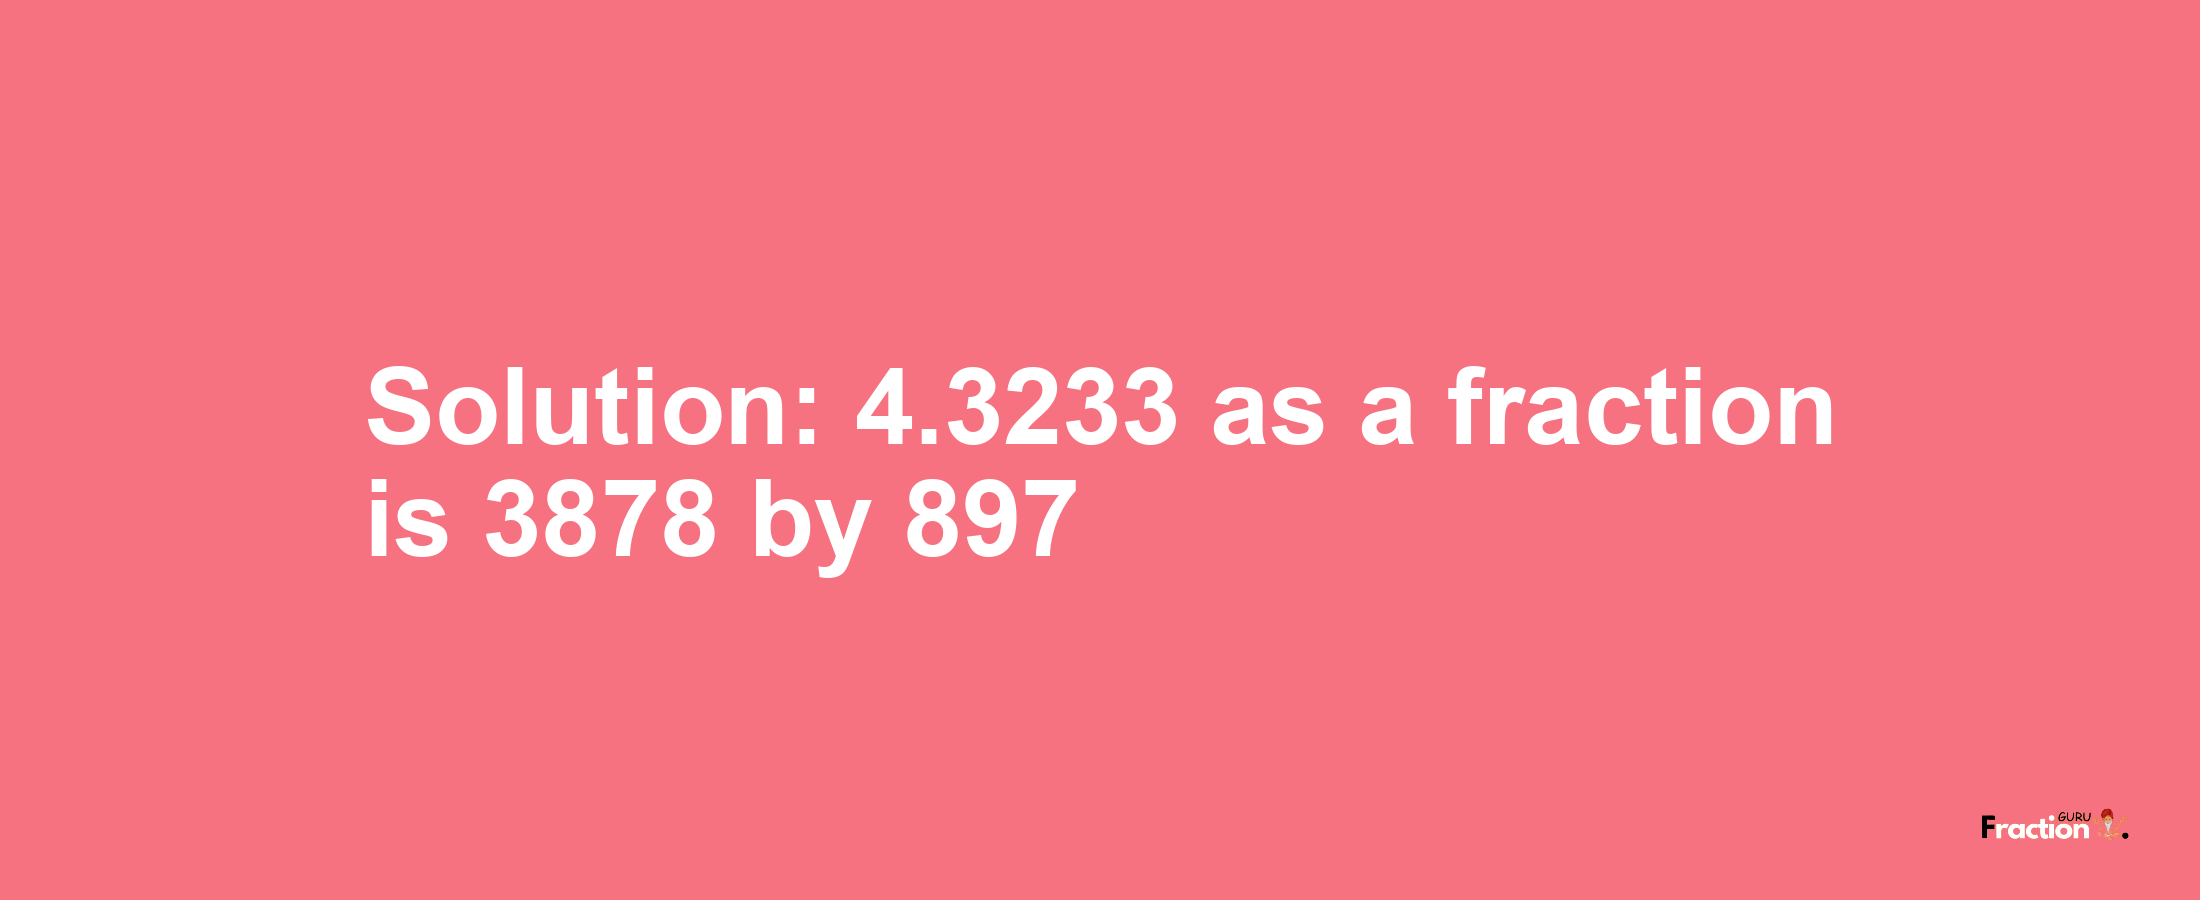 Solution:4.3233 as a fraction is 3878/897